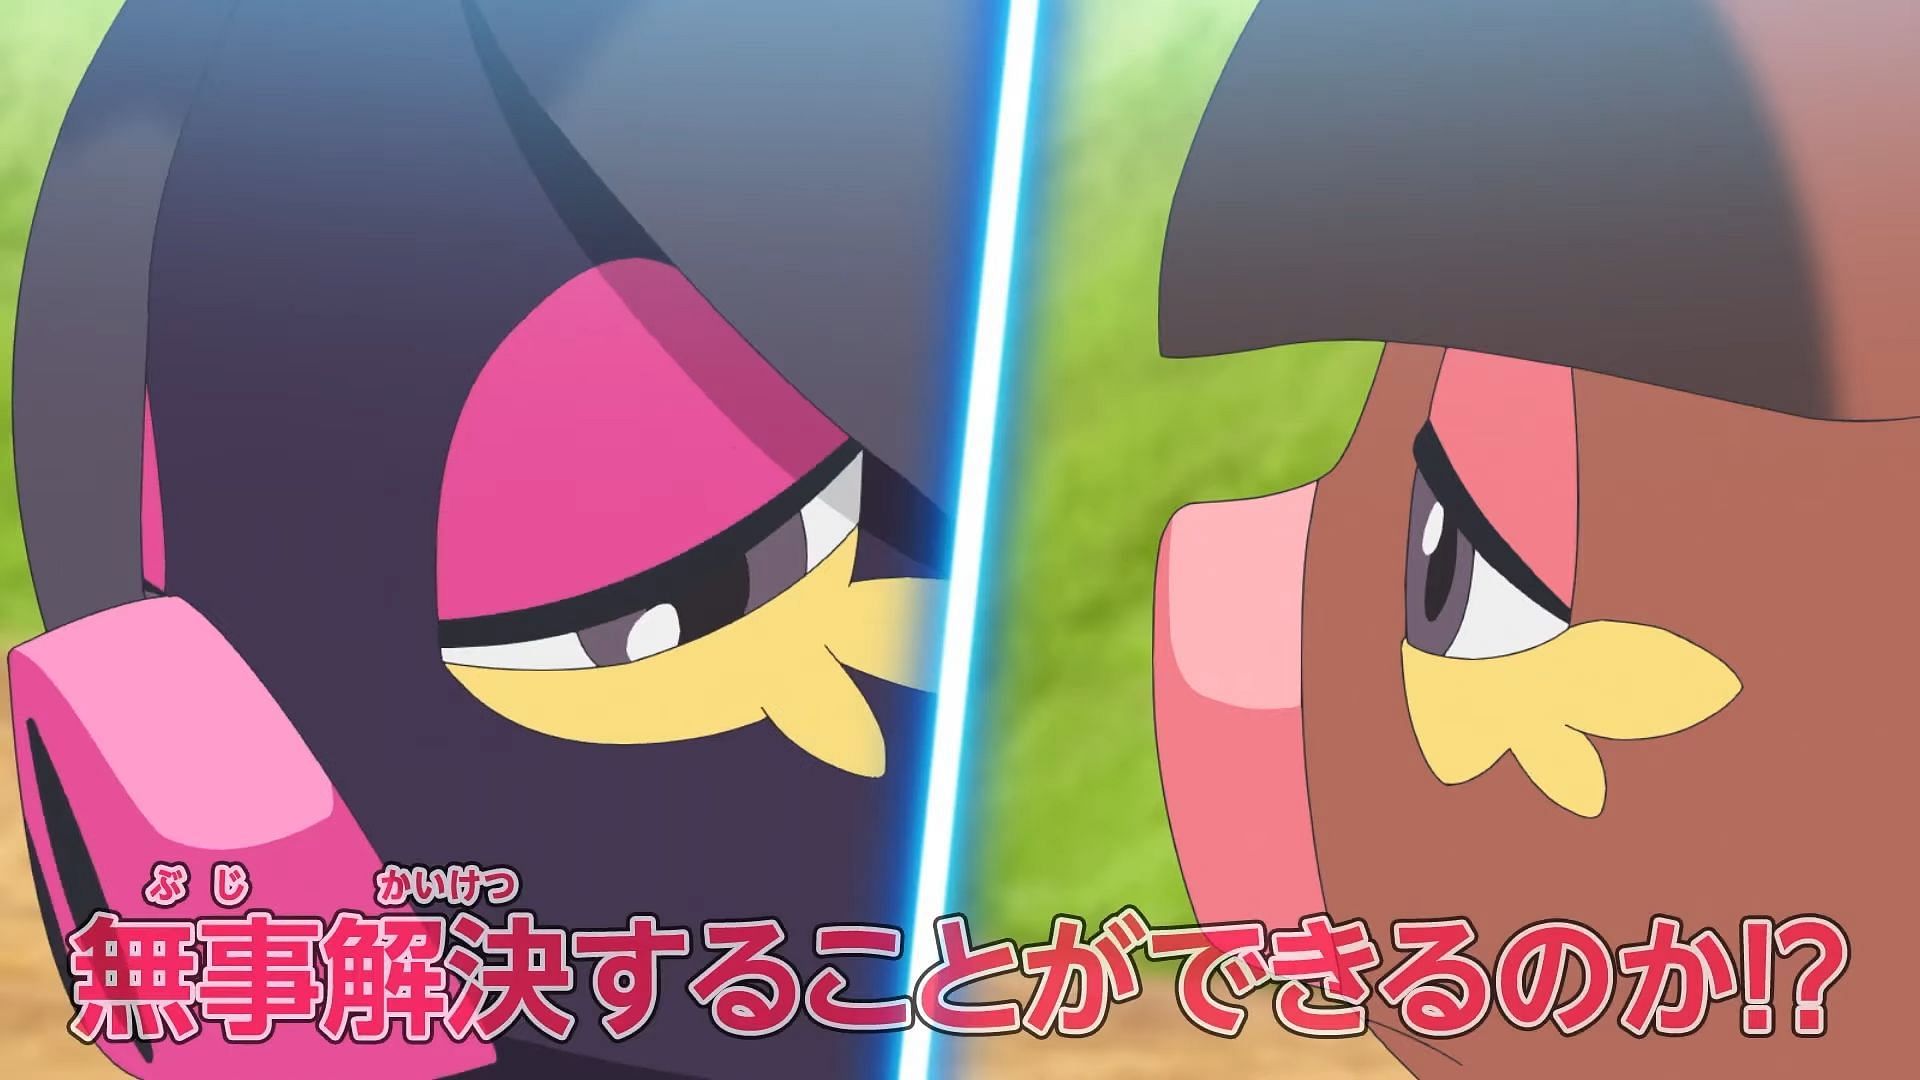 Two Oinkologne are at odds in Pokemon Horizons Episode 36 (Image via The Pokemon Company)